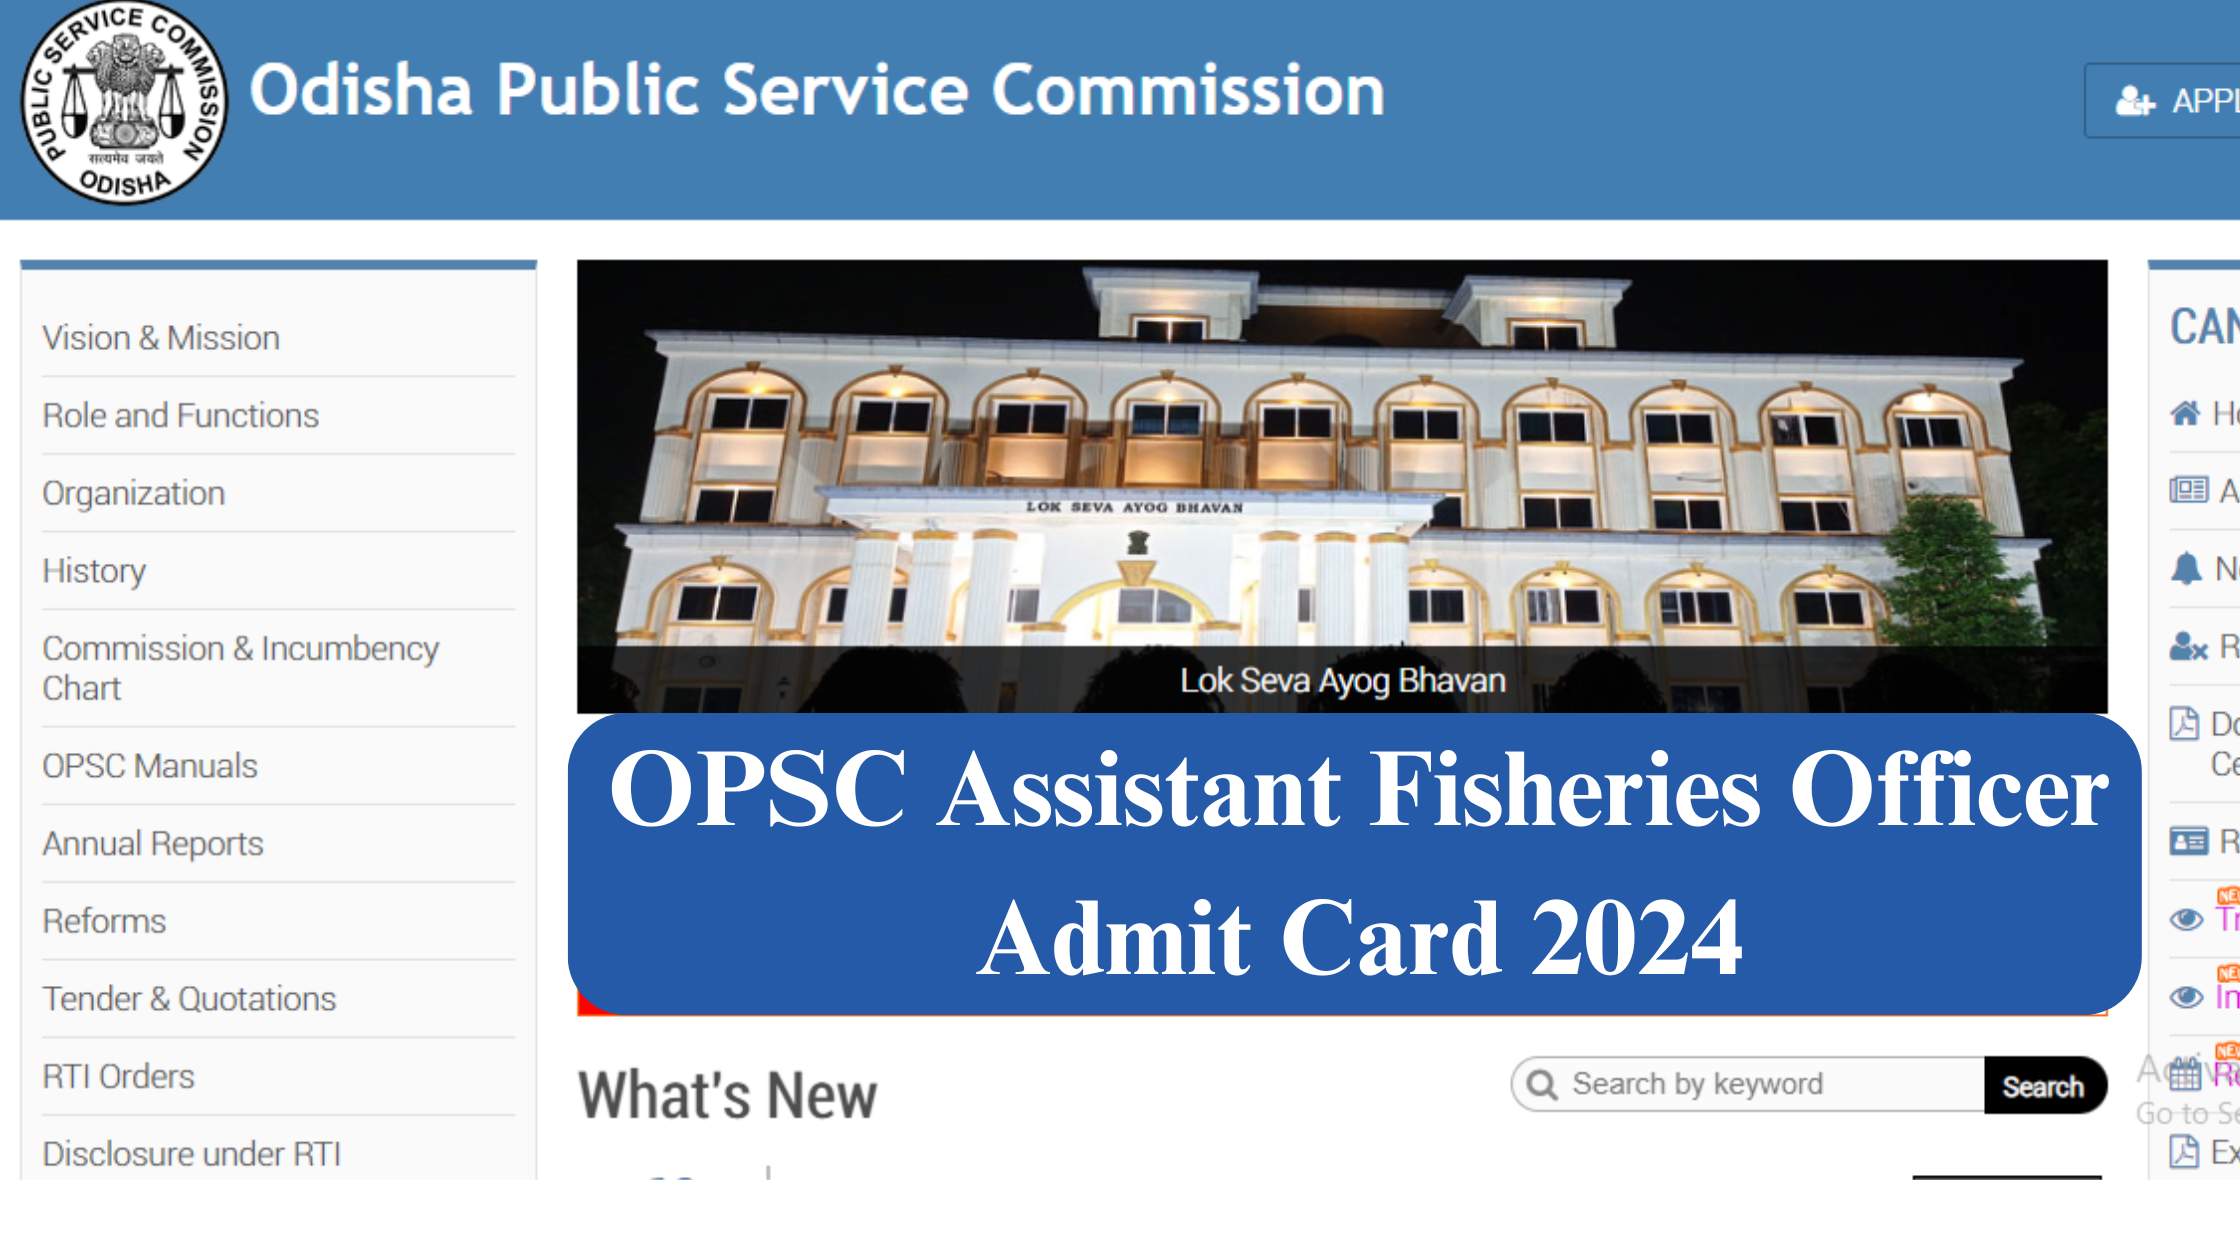 OPSC Assistant Fisheries Officer Admit Card 2024